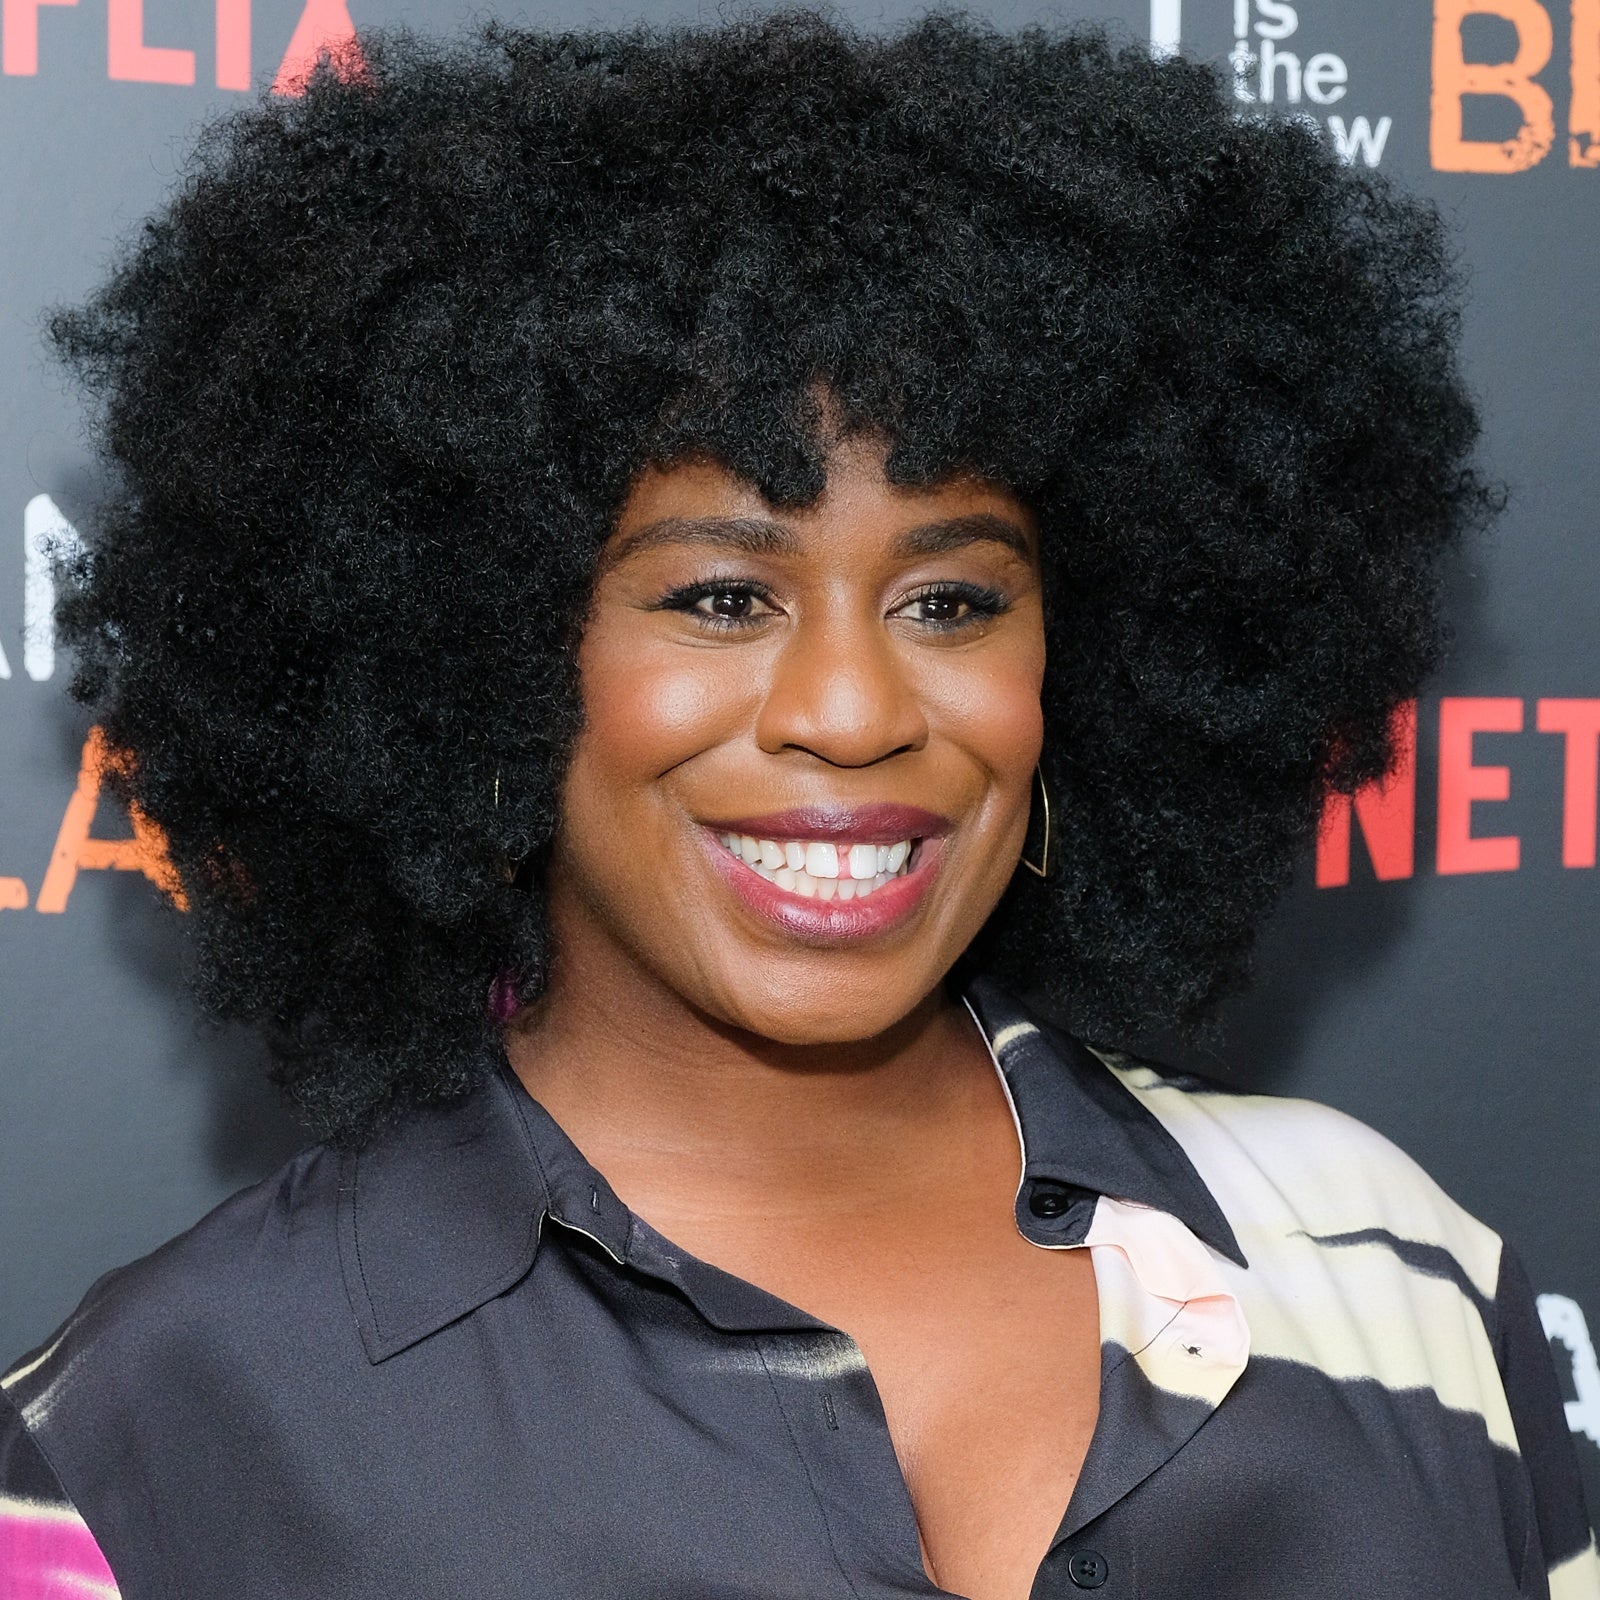 ‘Your Smile Is Your Superpower’: Uzo Aduba On The Power Of Confidence, Legacy, And Motherhood